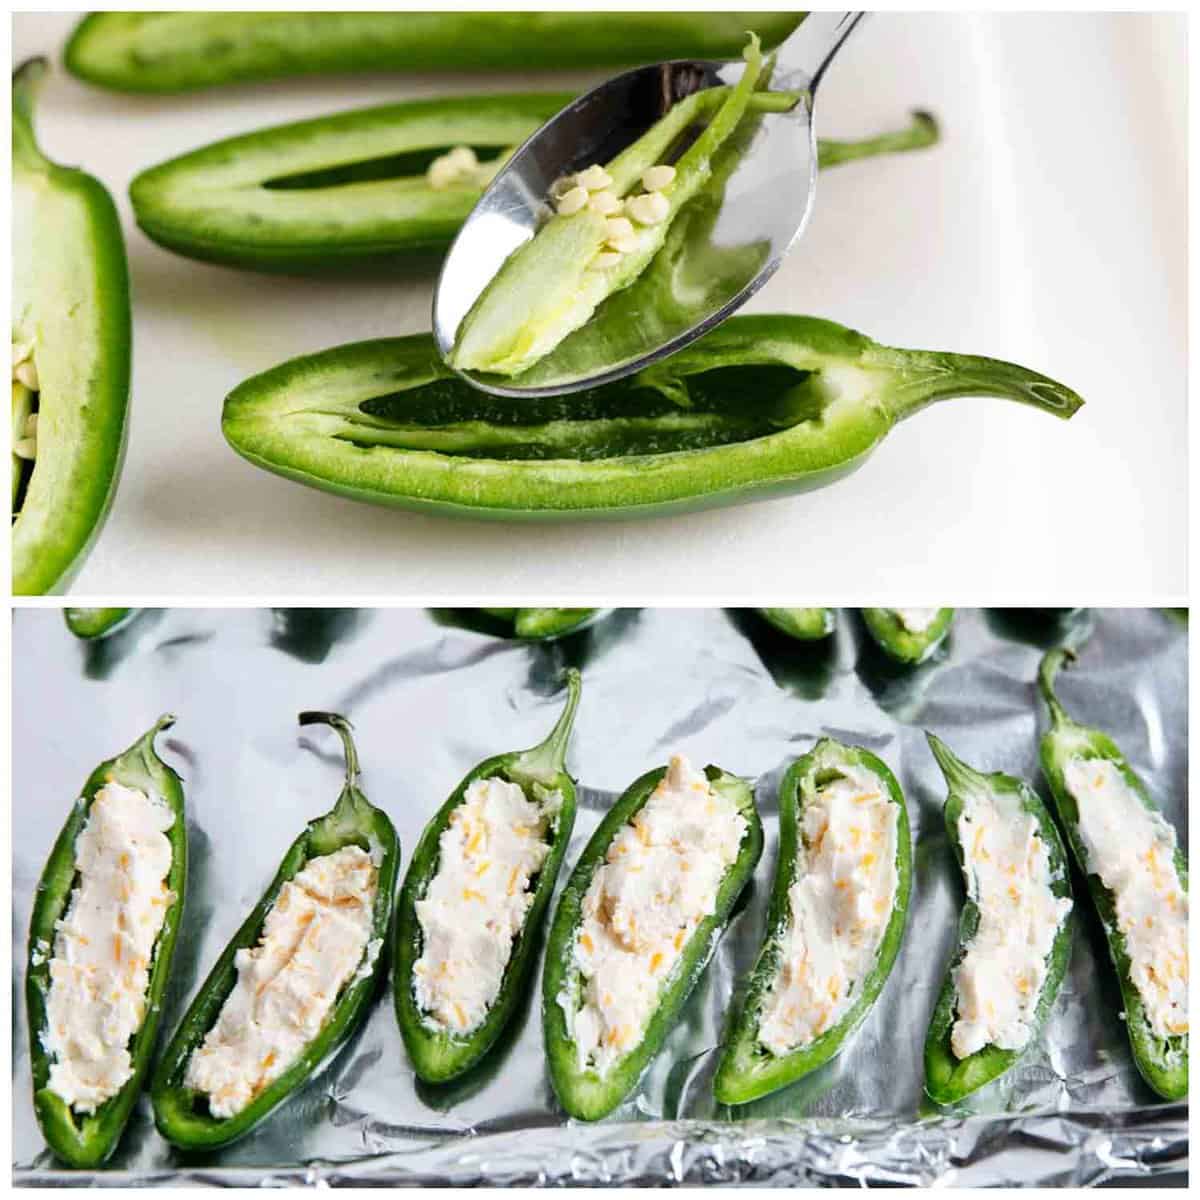 Removing seeds from sliced jalapenos.